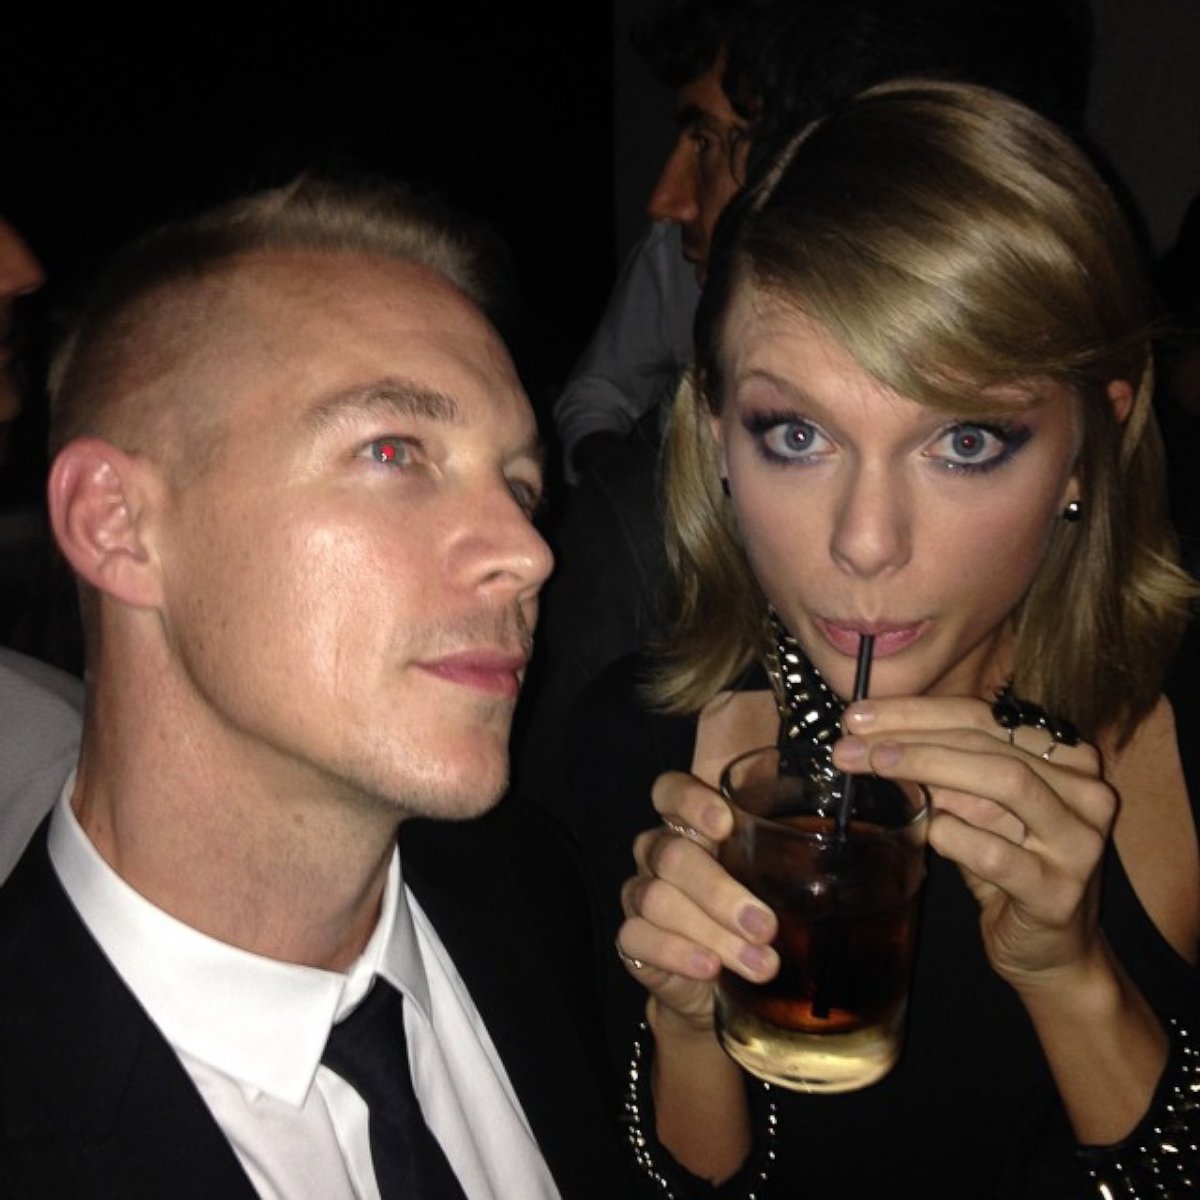 PHOTO: Diplo posted this photo on Instagram with this caption: "Then this happened @taylorswift vs taylor spliff #grammys2015," Feb 8, 2015.